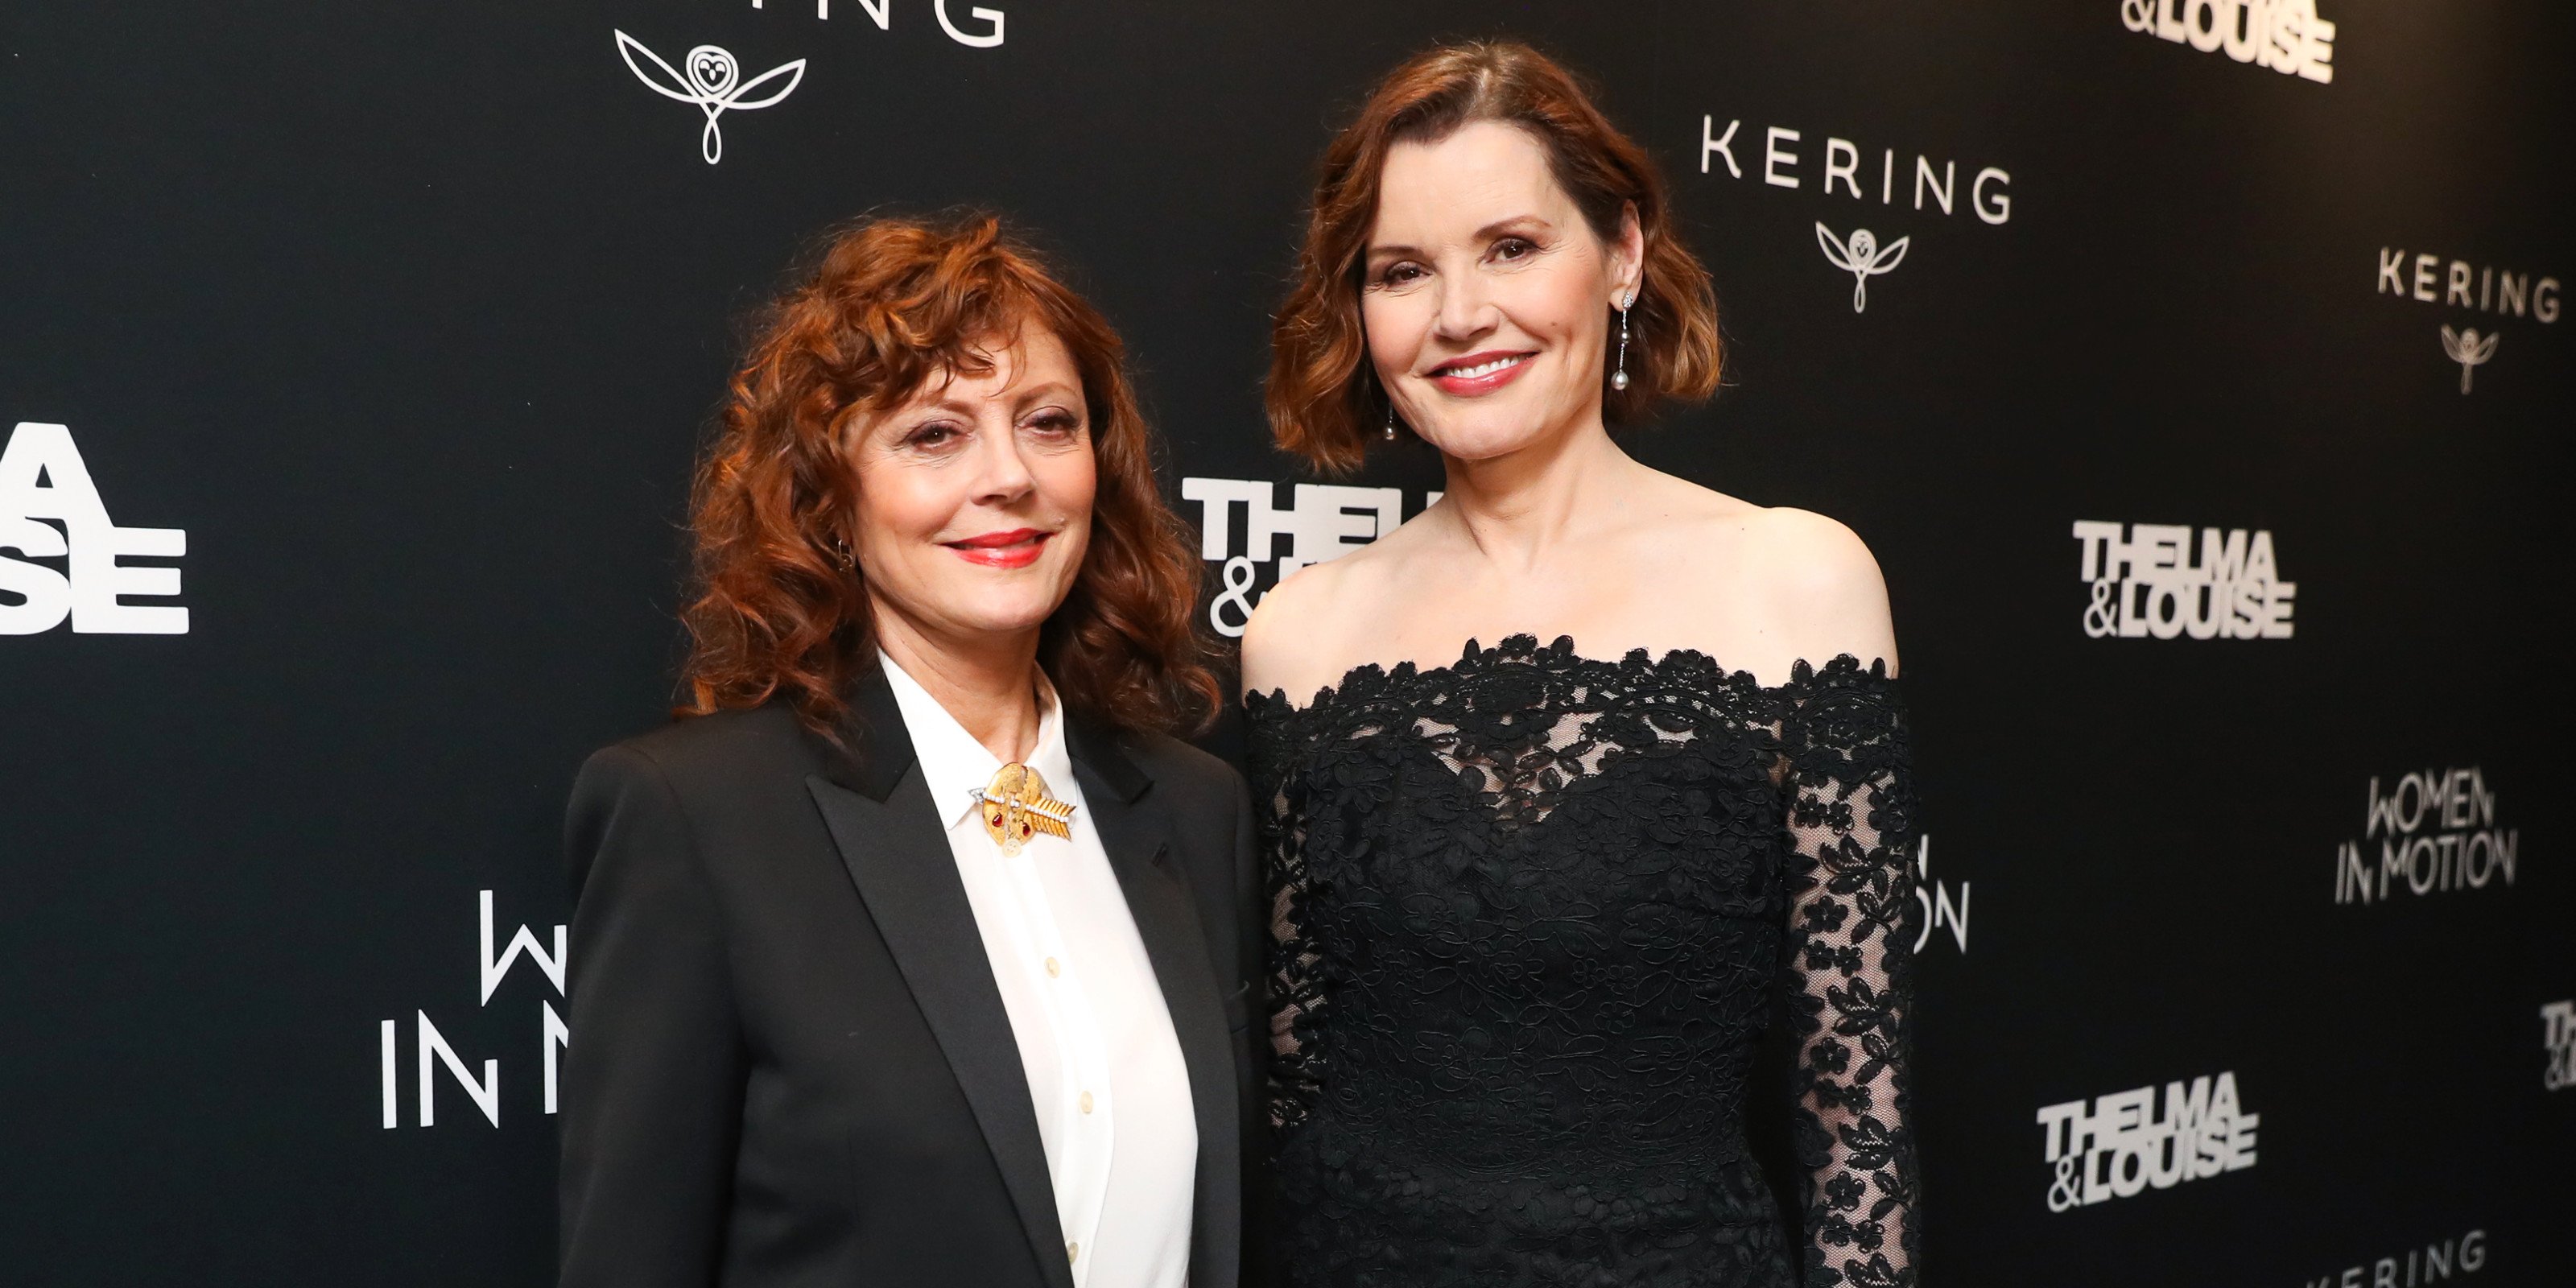 Actresses Susan Sarandon and Geena Davis attend the "Thelma & Louise" Women In Motion screening at Museum of Modern Art on January 28, 2020 | Source: W Magazine